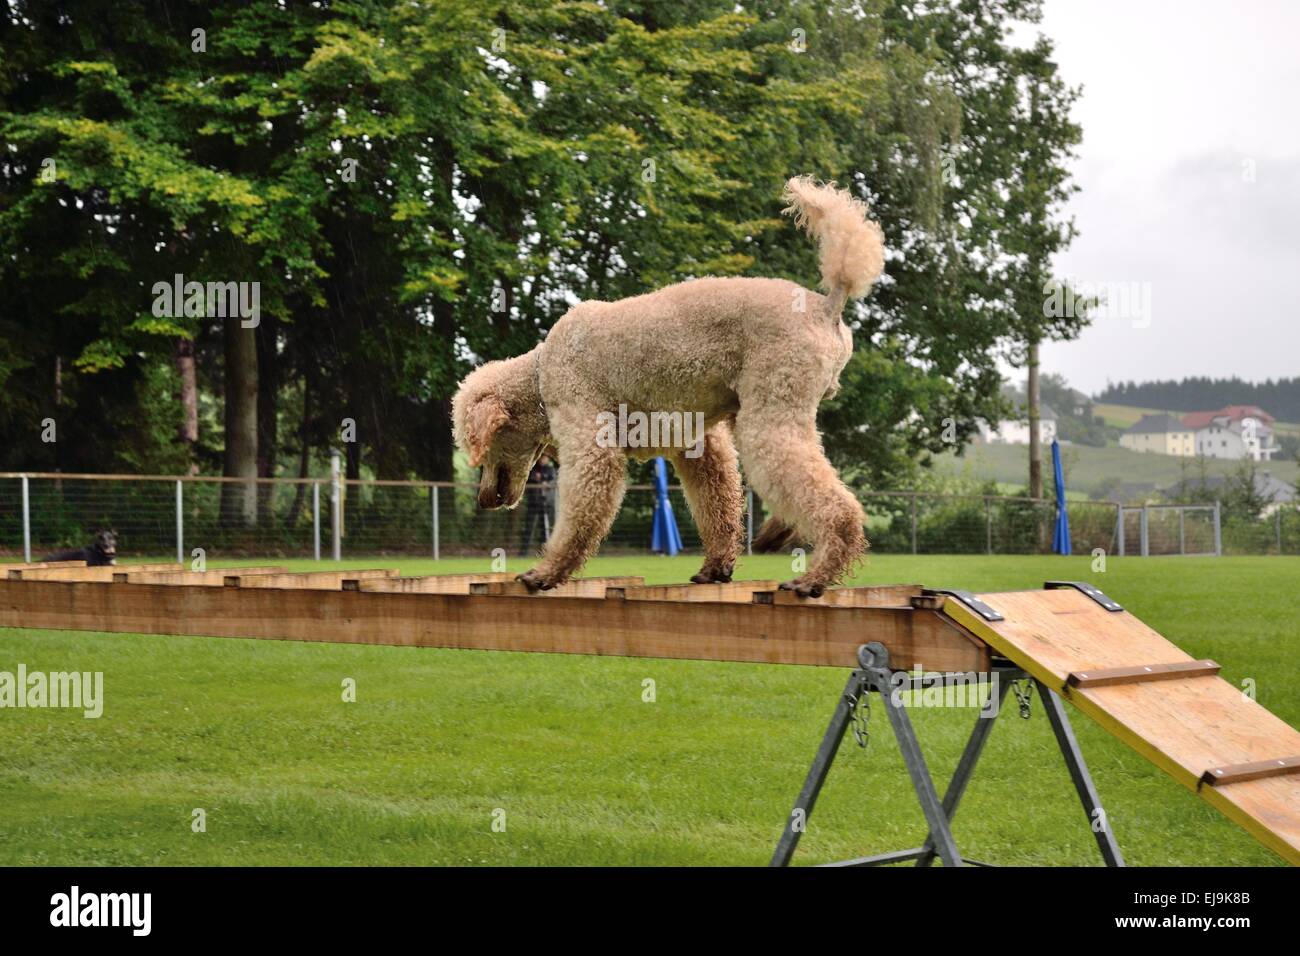 Poodle on a rescue ladder Stock Photo